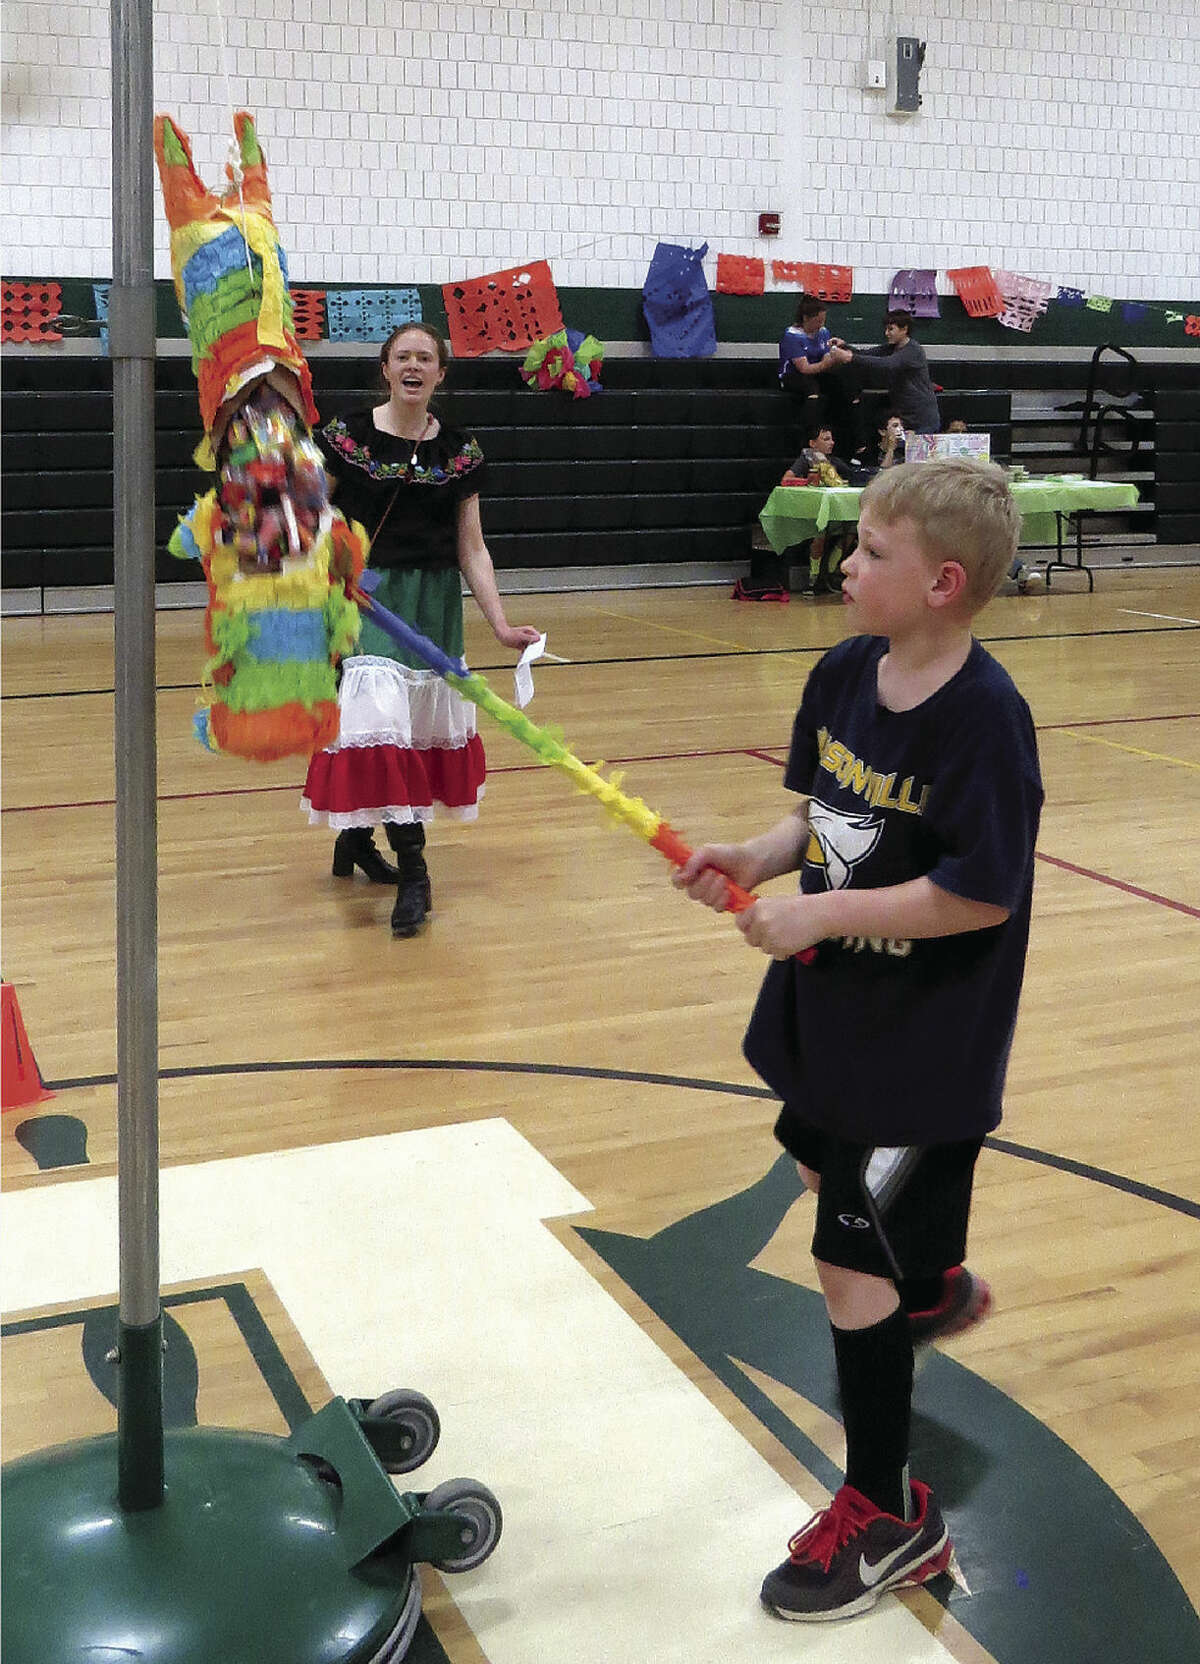 Noah Adams cracks open one of the piñatas like a pro during the event at Laker Schools.  (Submitted Photo)